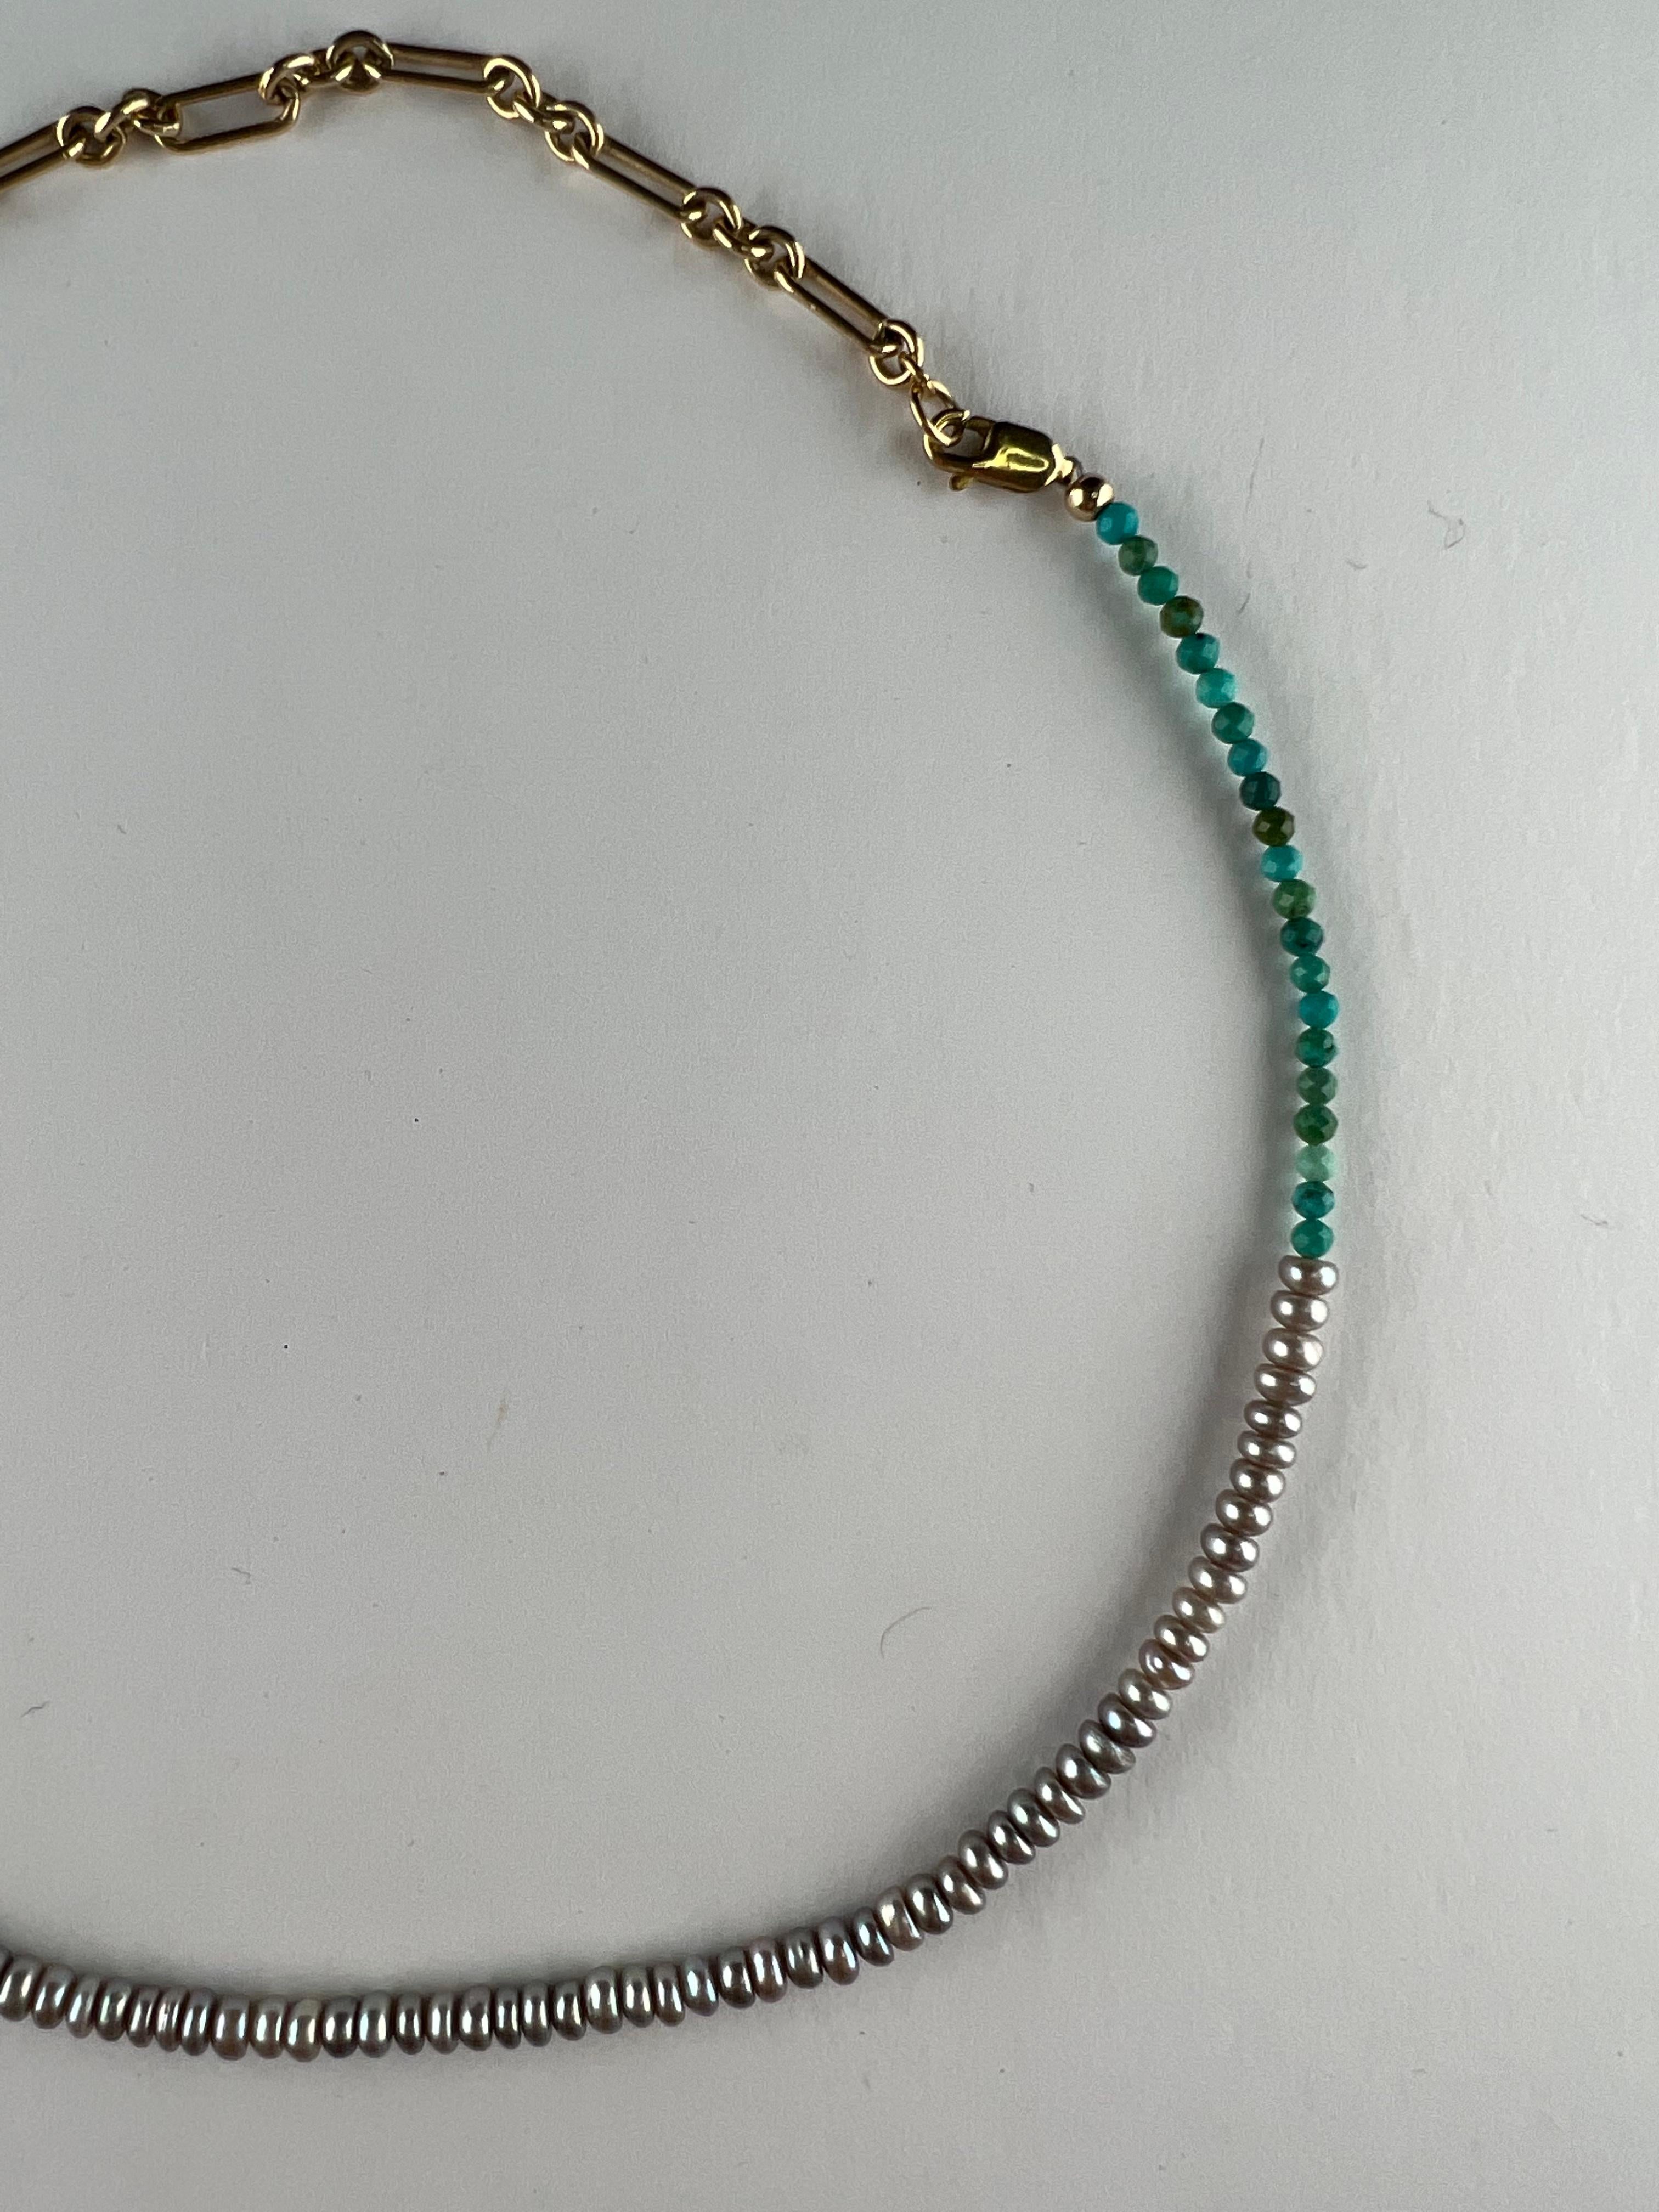 Silver Pearl Chain Necklace Choker Beaded Chrysoprase J Dauphin For Sale 2